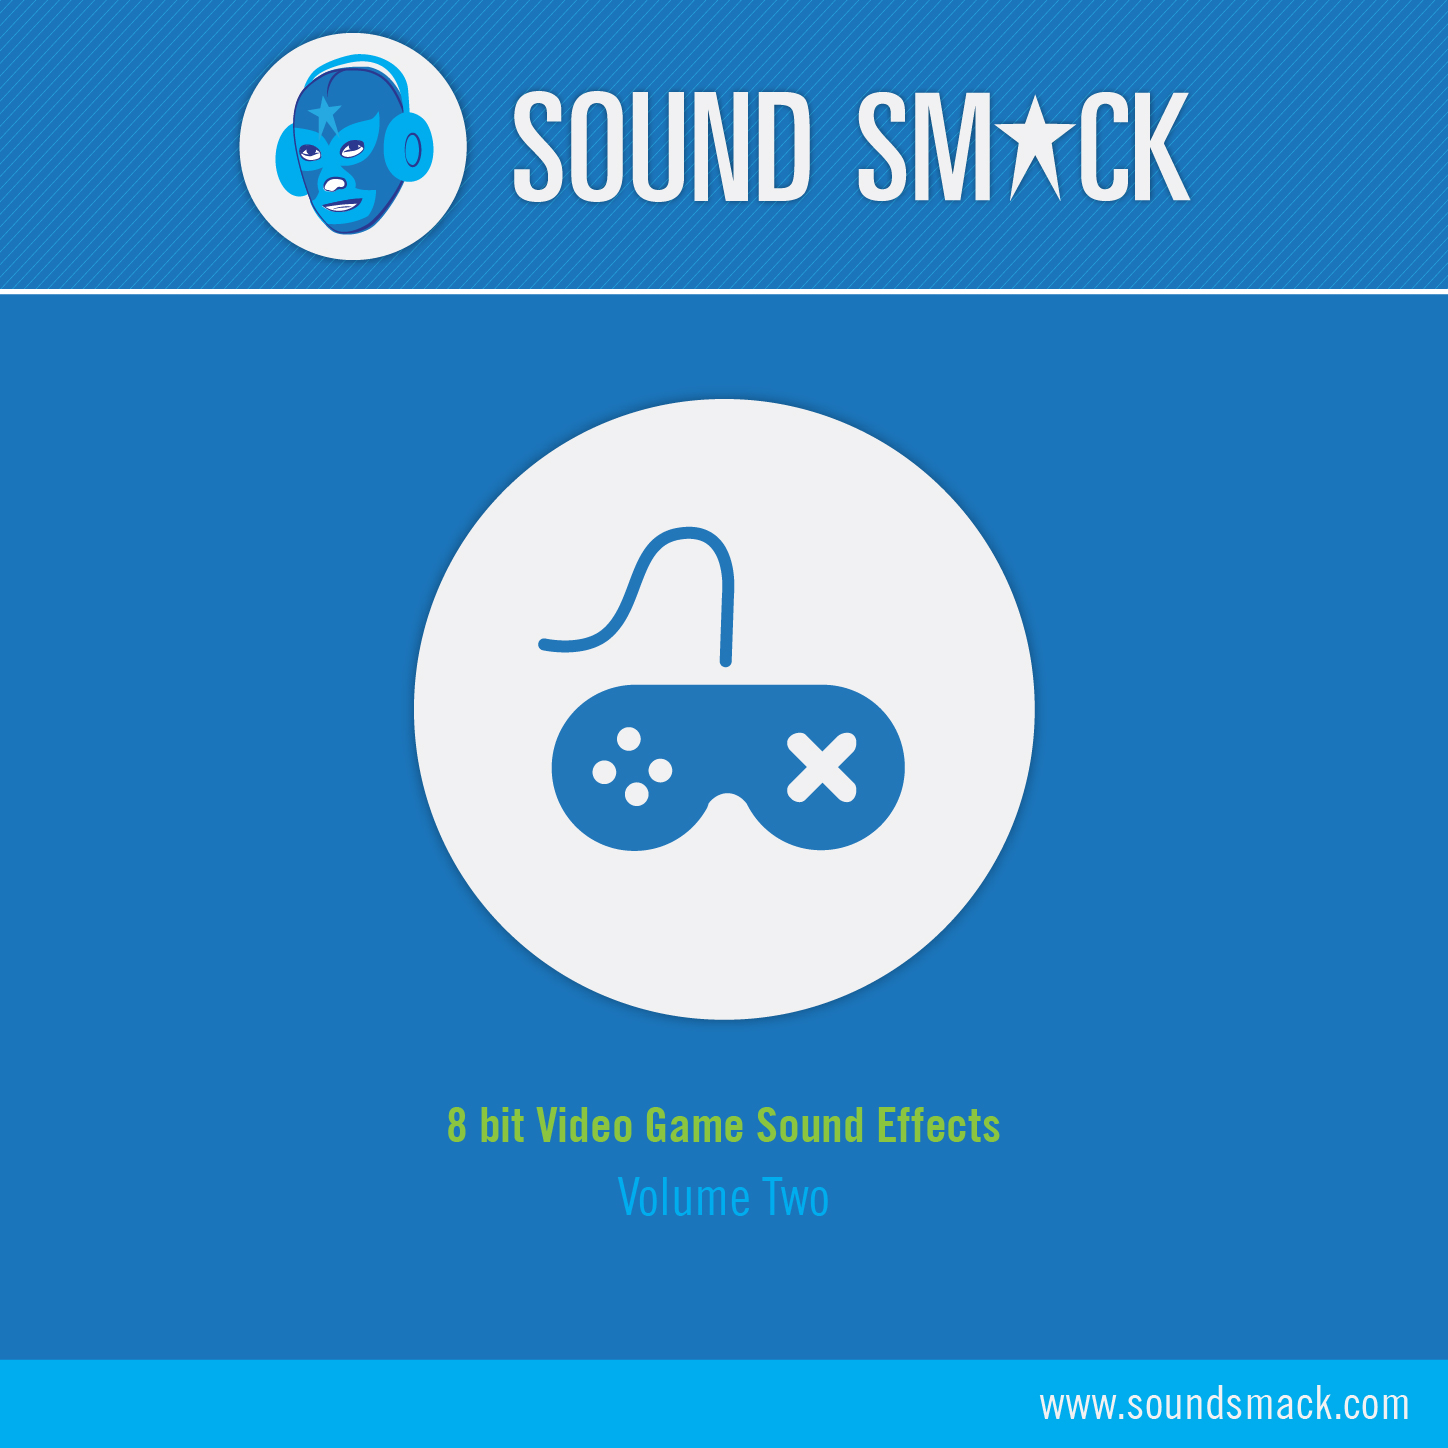 Video Game Sound Effects Archives - Soundsmack